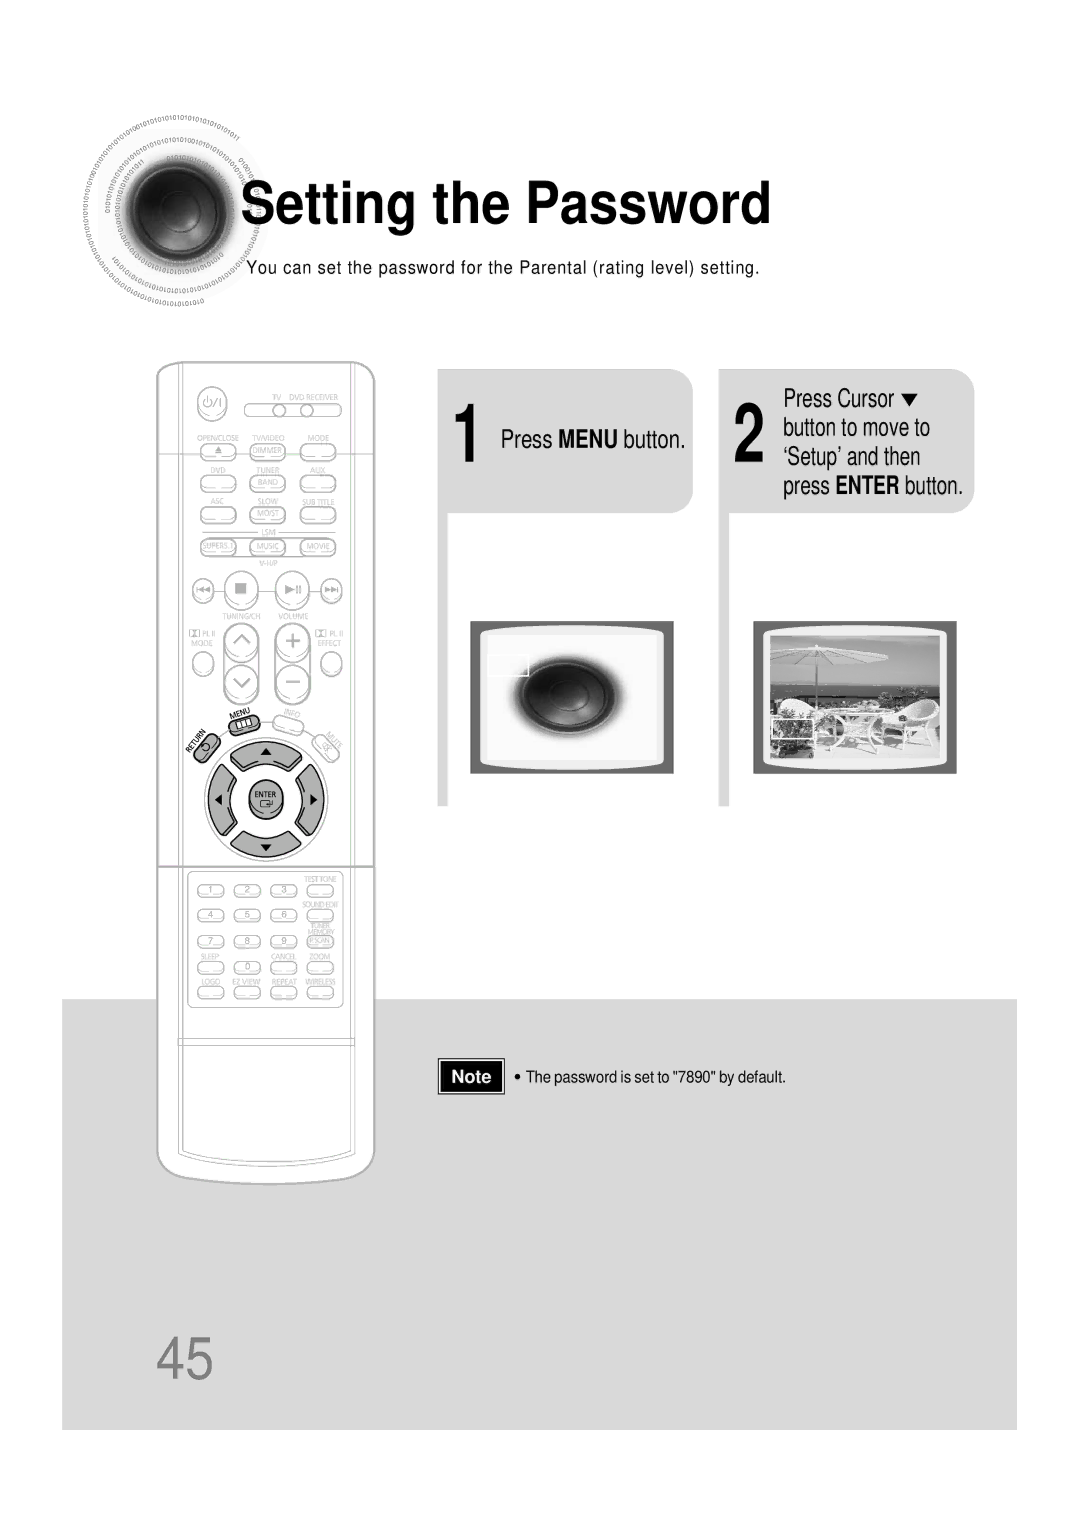 Samsung HT-DB390 instruction manual Setting the Password, Press Cursor Button to move to Press Menu button 